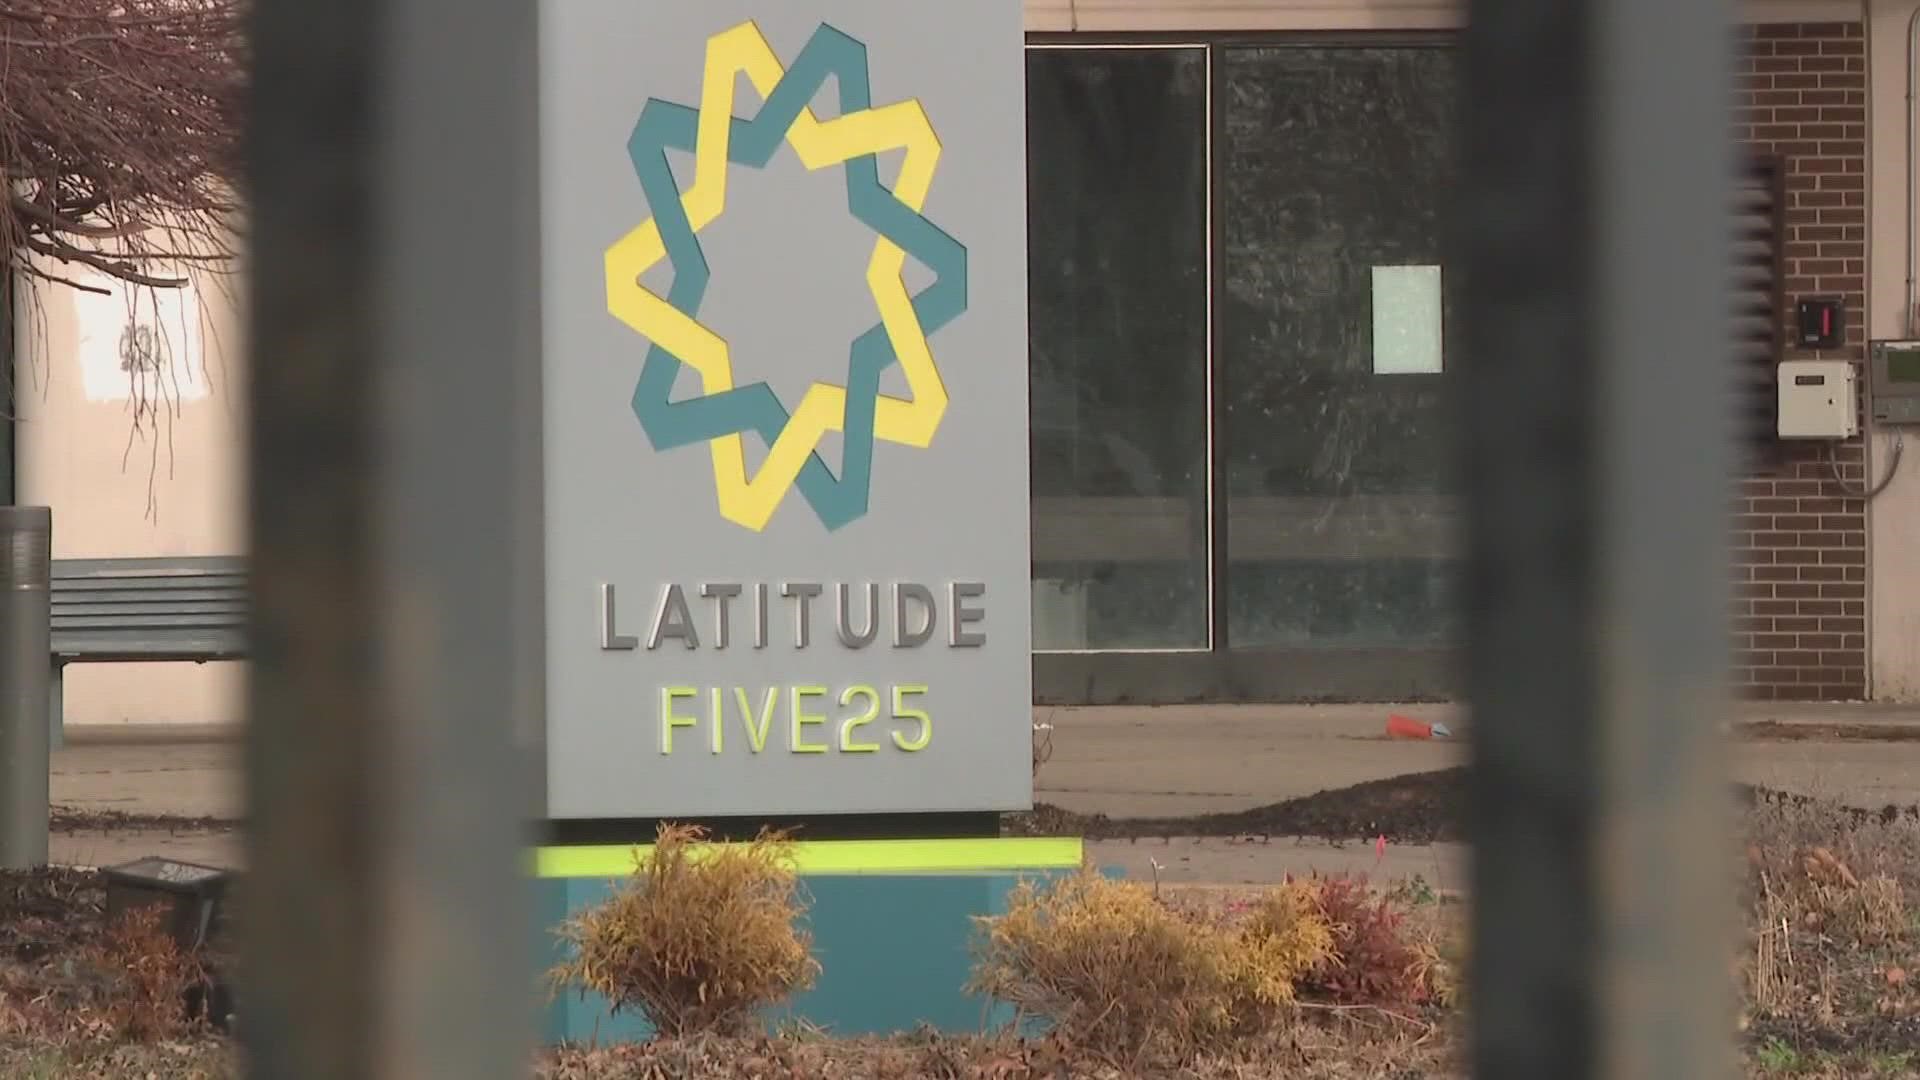 Nearly 100 residents of Latitude Five25 met with city and county leaders on Wednesday.